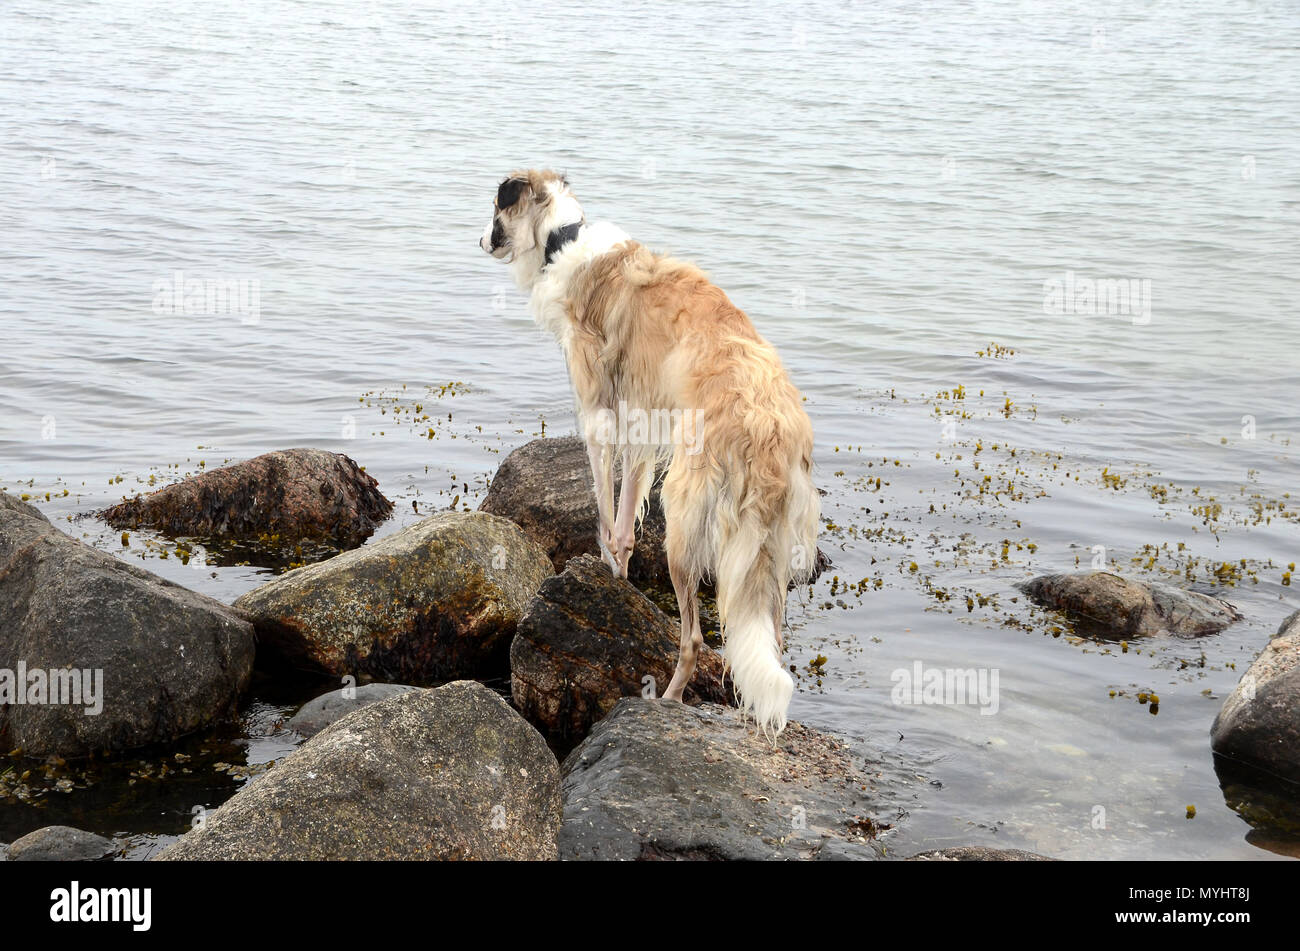 Borzoi dog stands on stones in water, with elevated forebody, looking out to the sea. Stock Photo